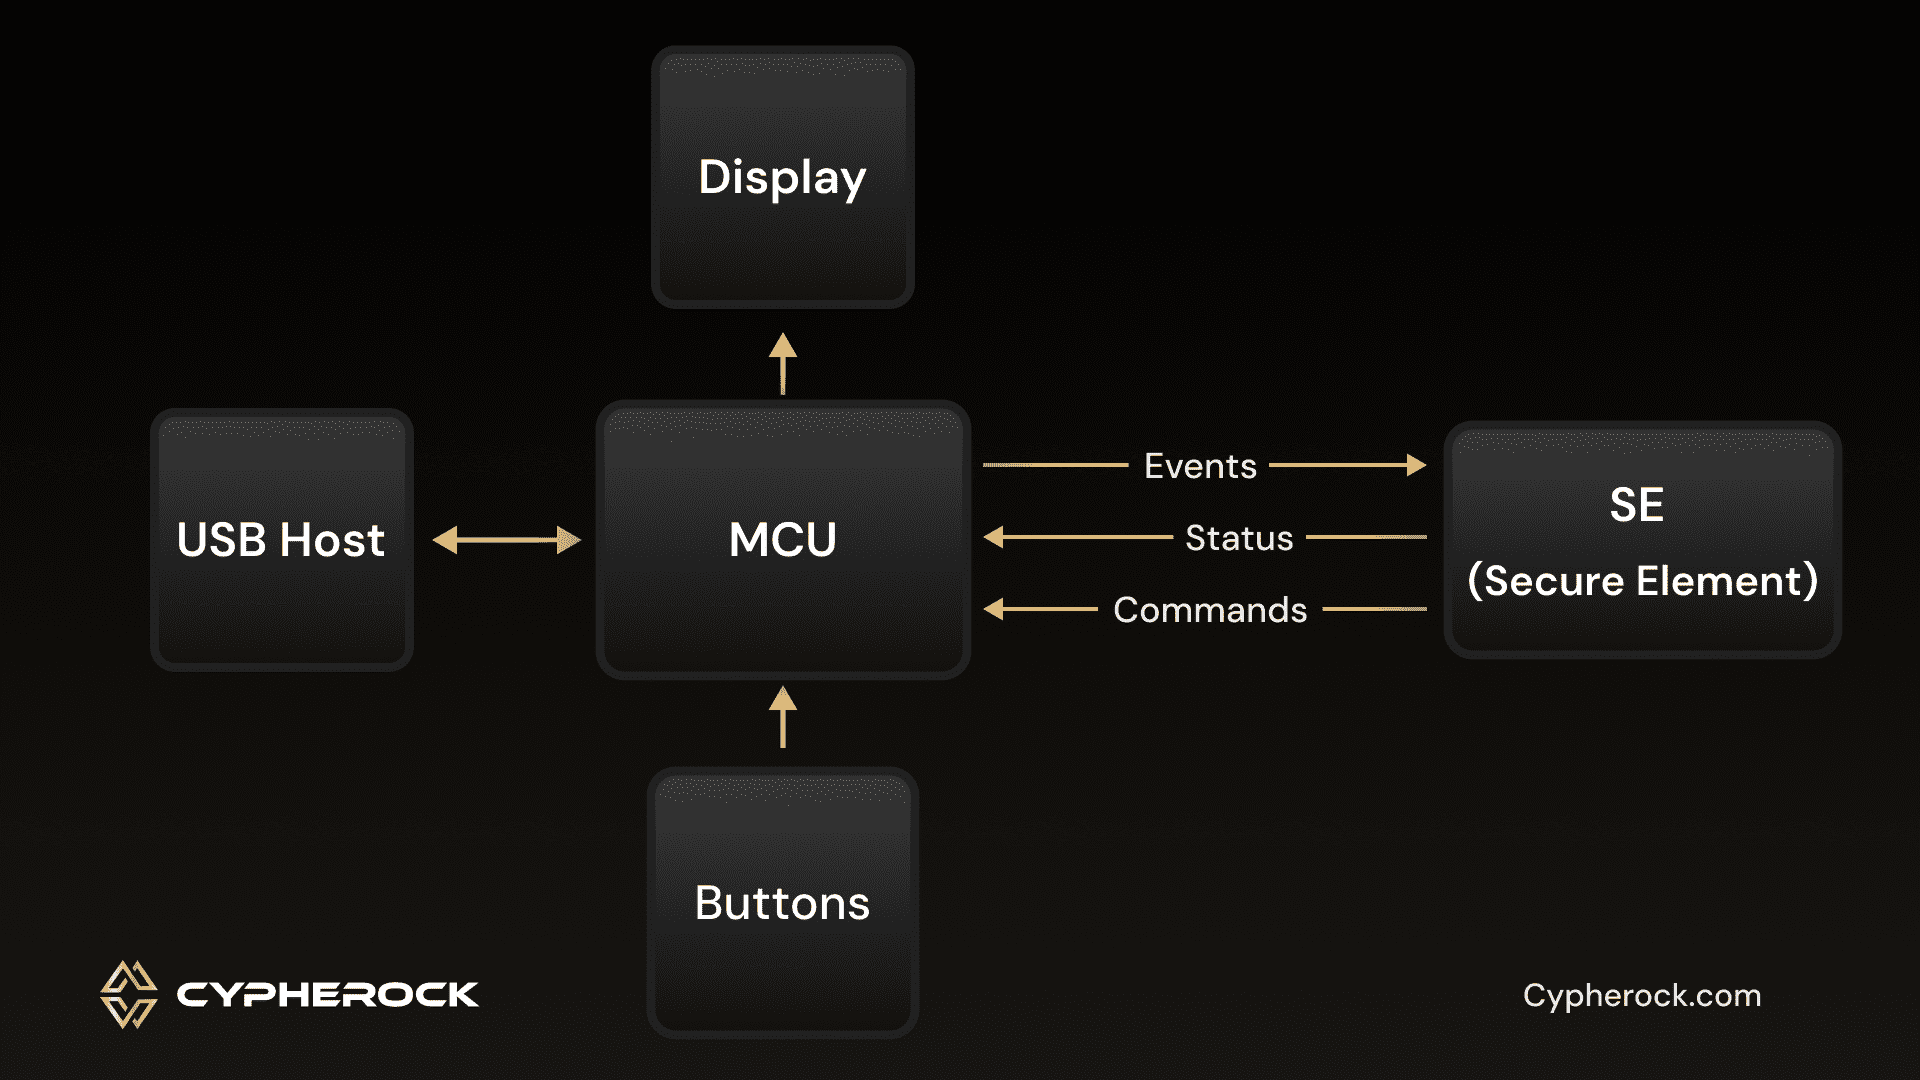 Anatomy of a Trusted Display